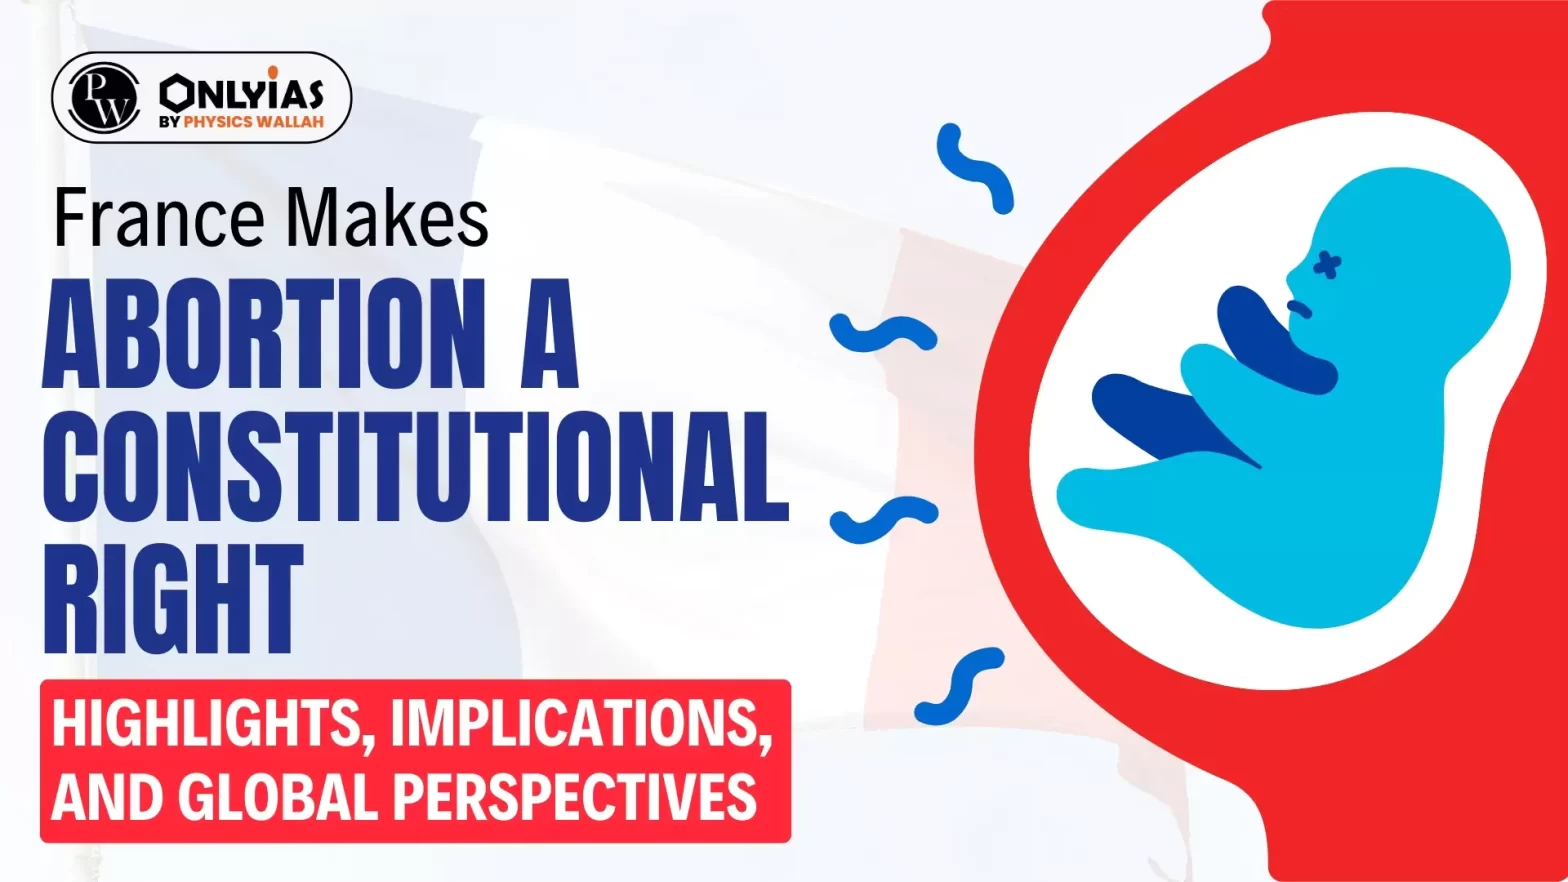 France Makes Abortion a Constitutional Right: Highlights, Implications, and Global Perspectives